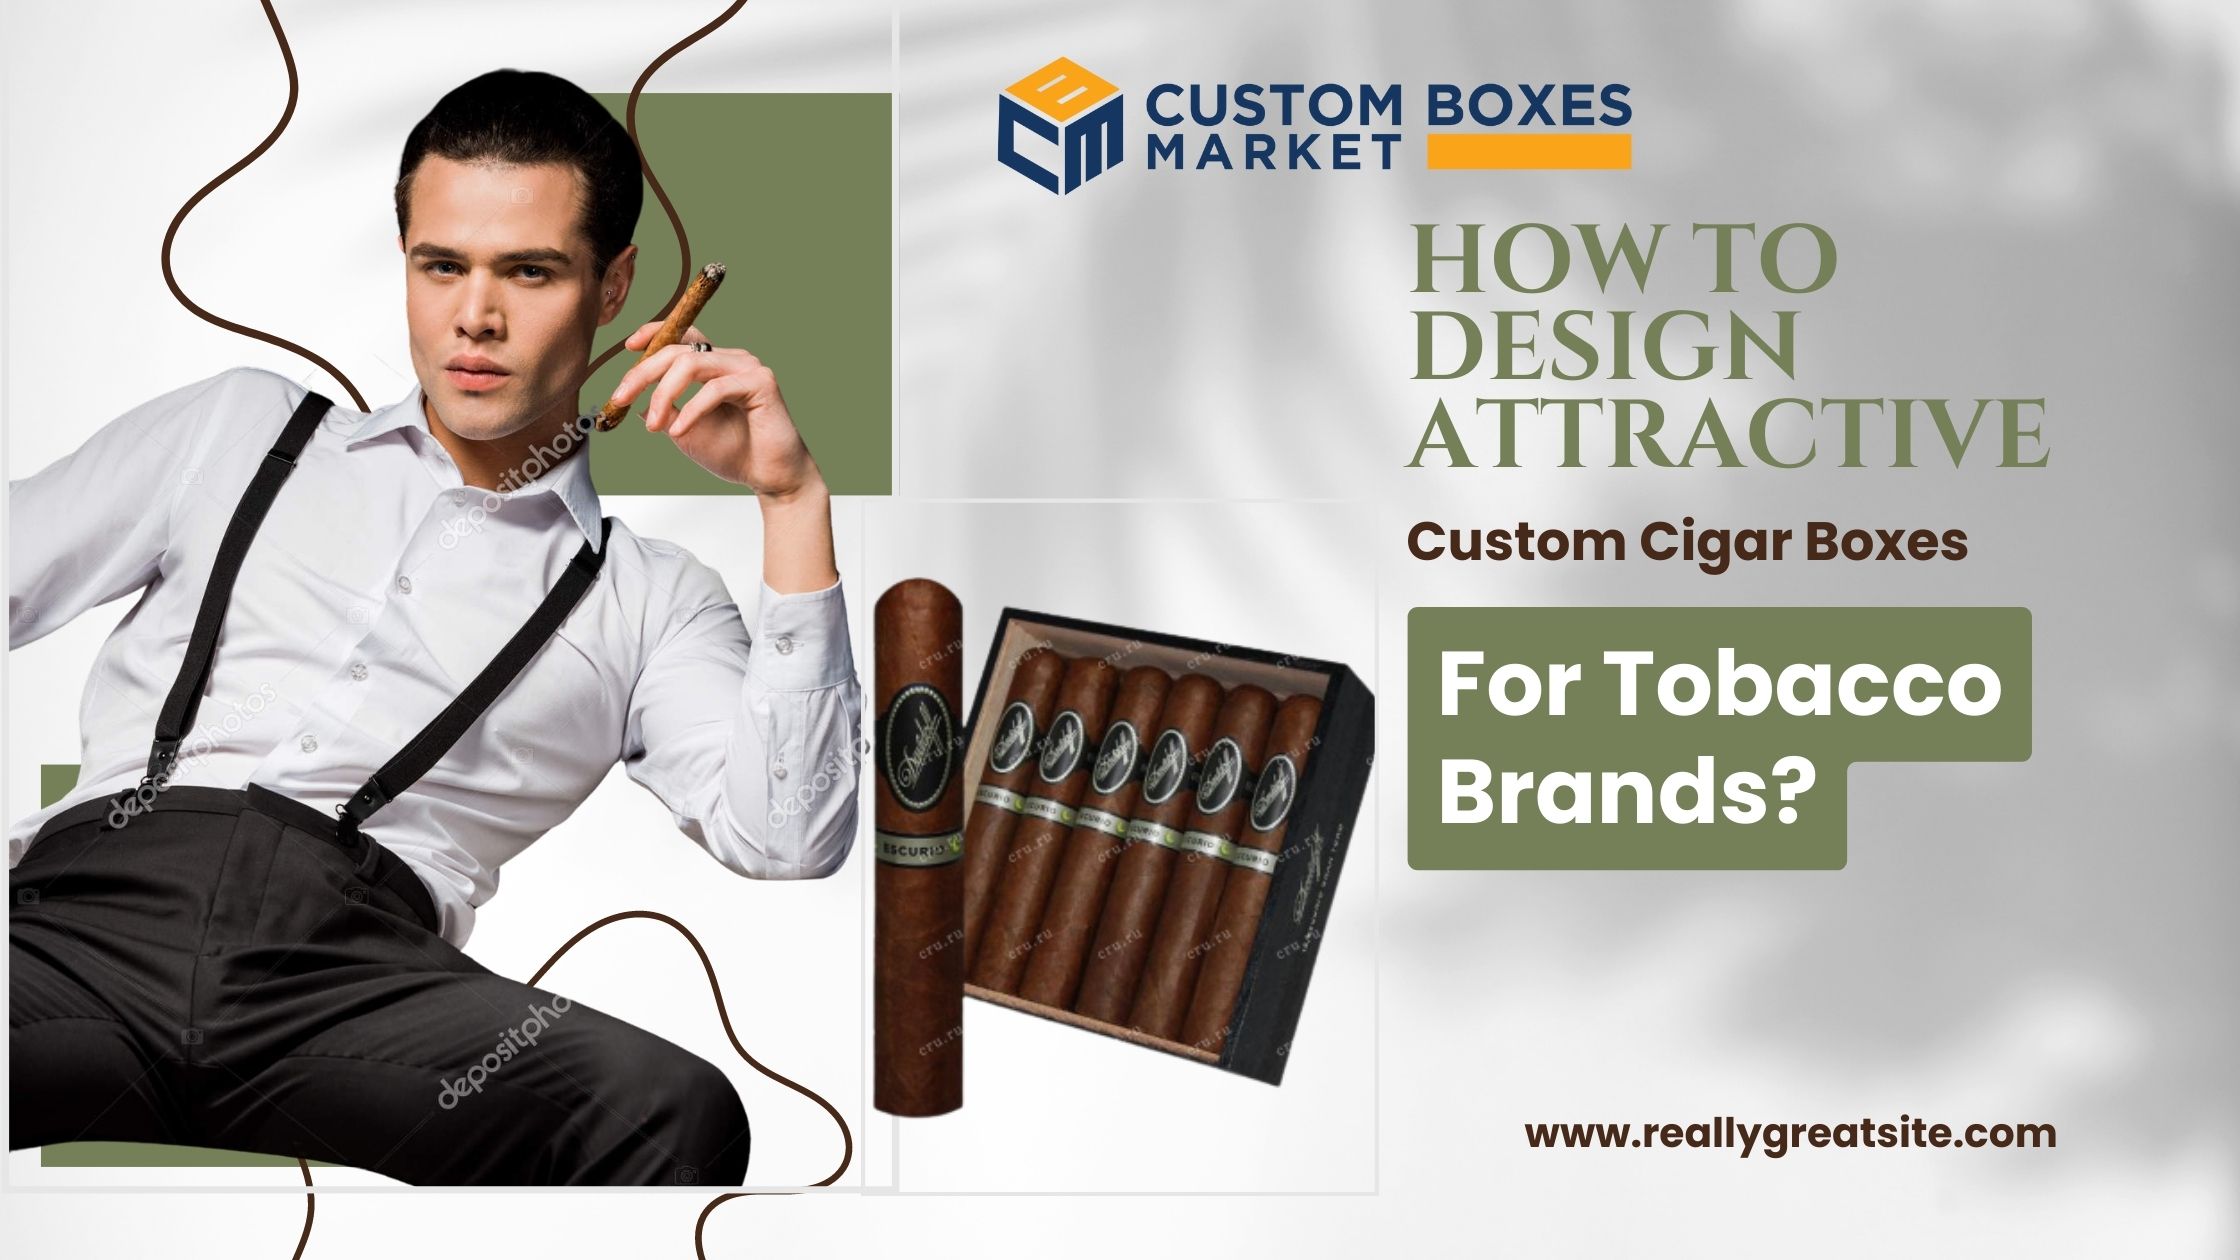 How To Design Attractive Custom Cigar Boxes For Tobacco Brands